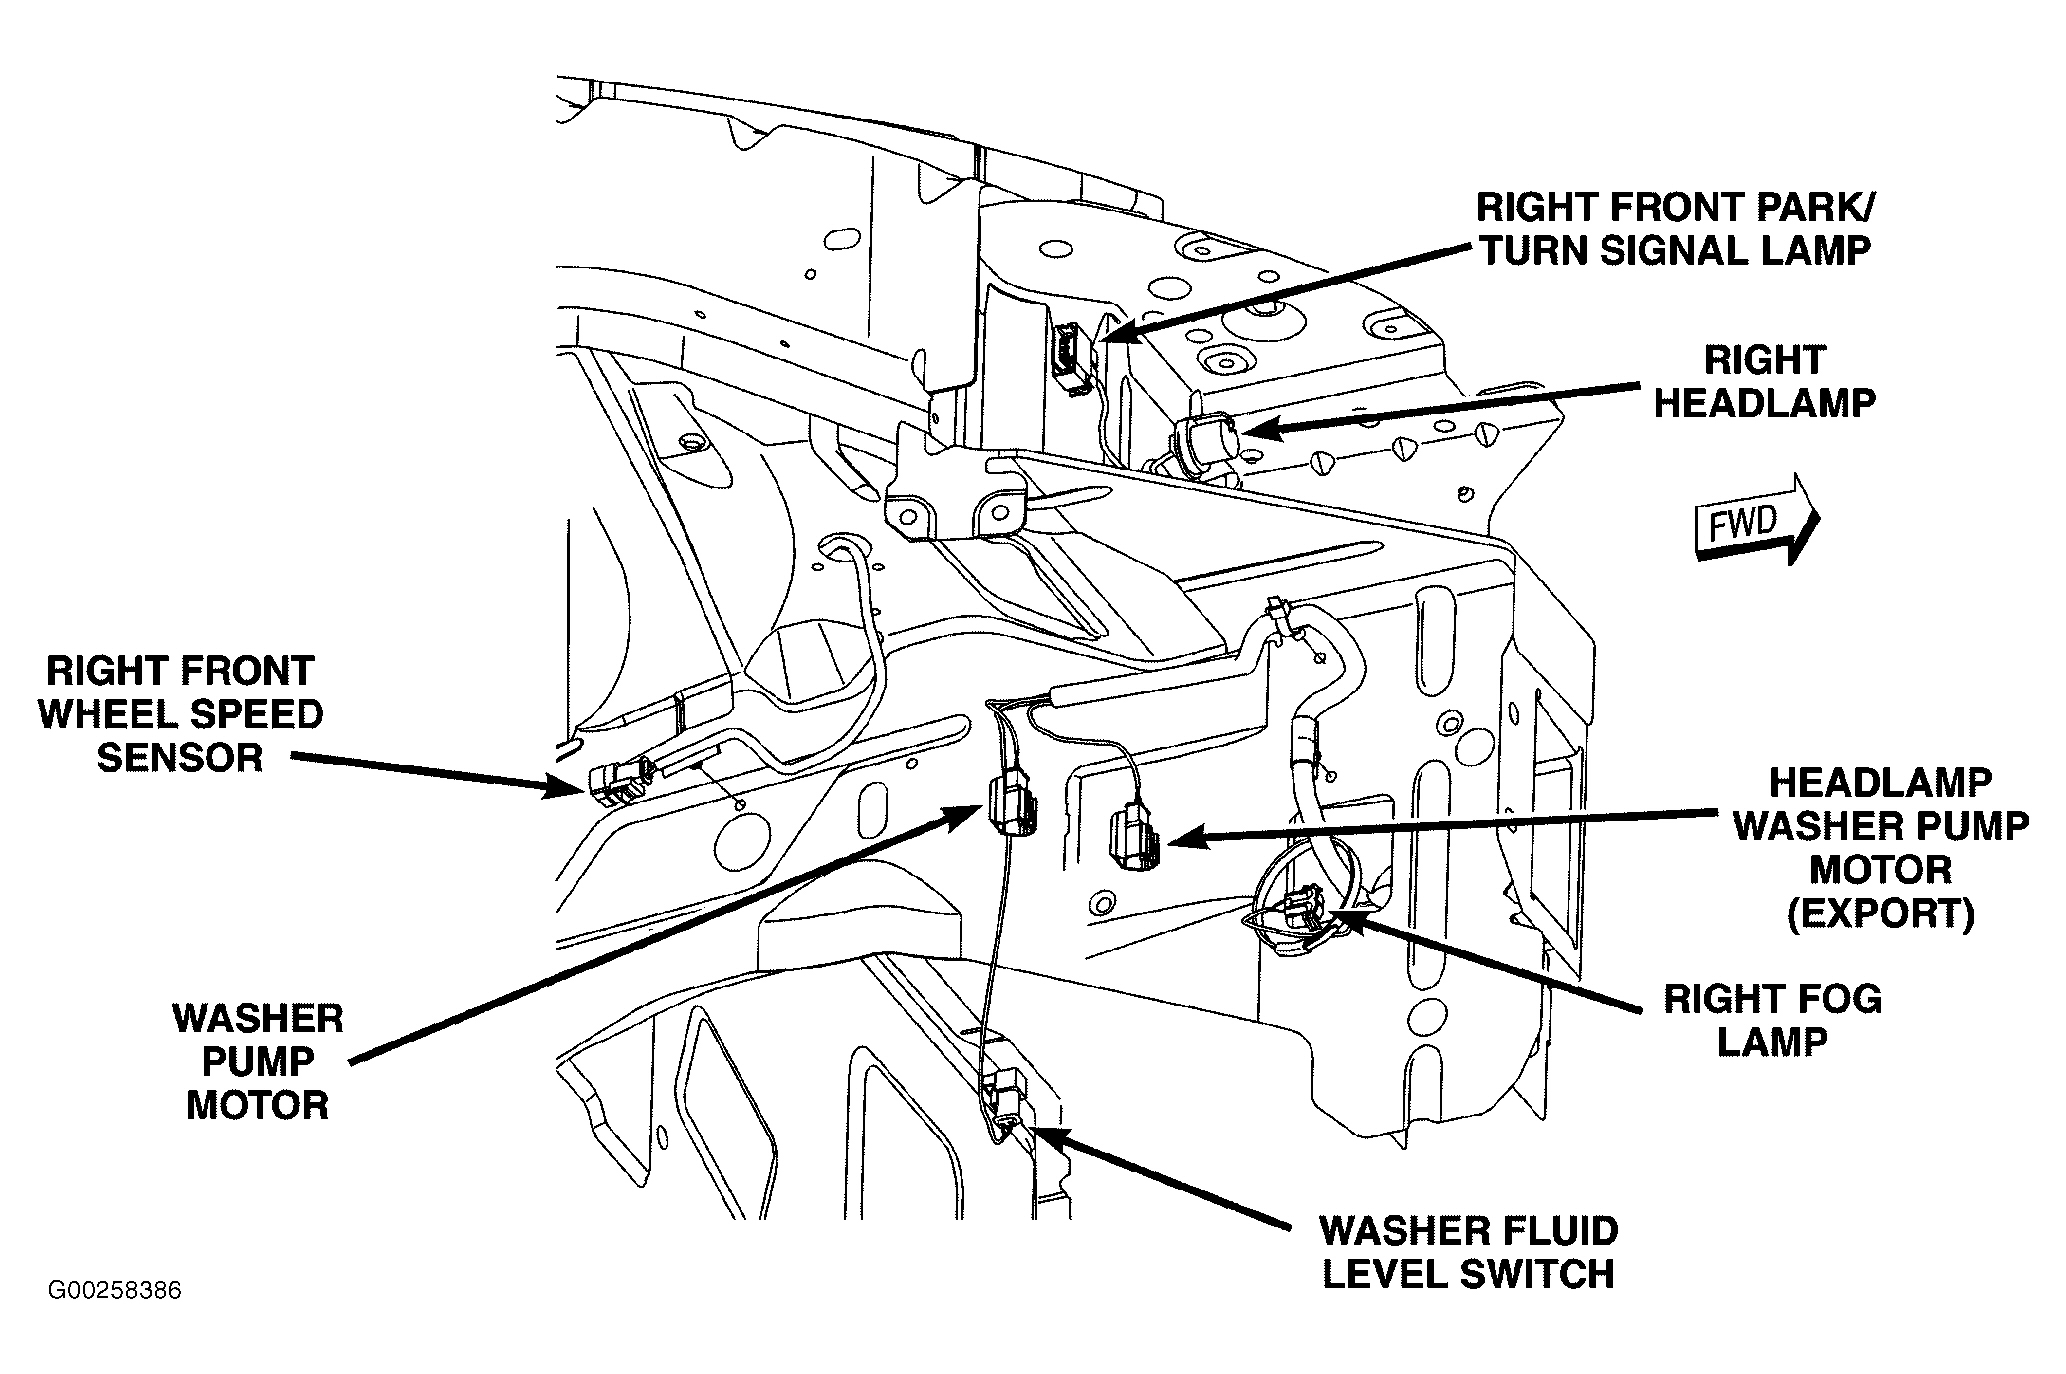 Dodge Grand Caravan SE 2007 - Component Locations -  Right Front Of Engine Compartment